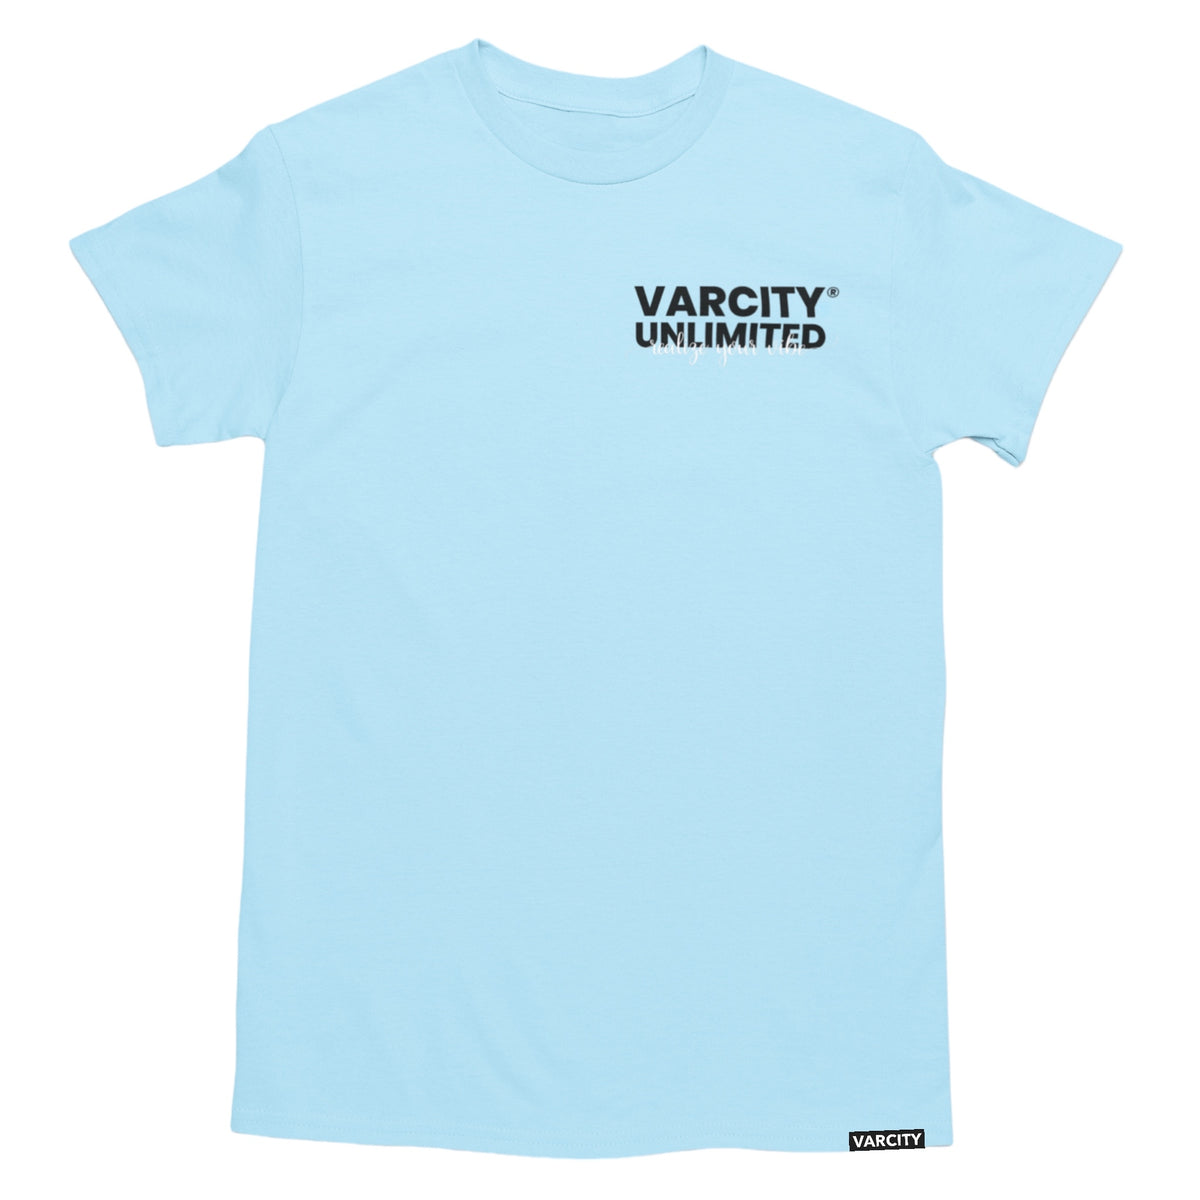 Varcity ® Unlimited Realize Your Vibe T Shirt Light Blue